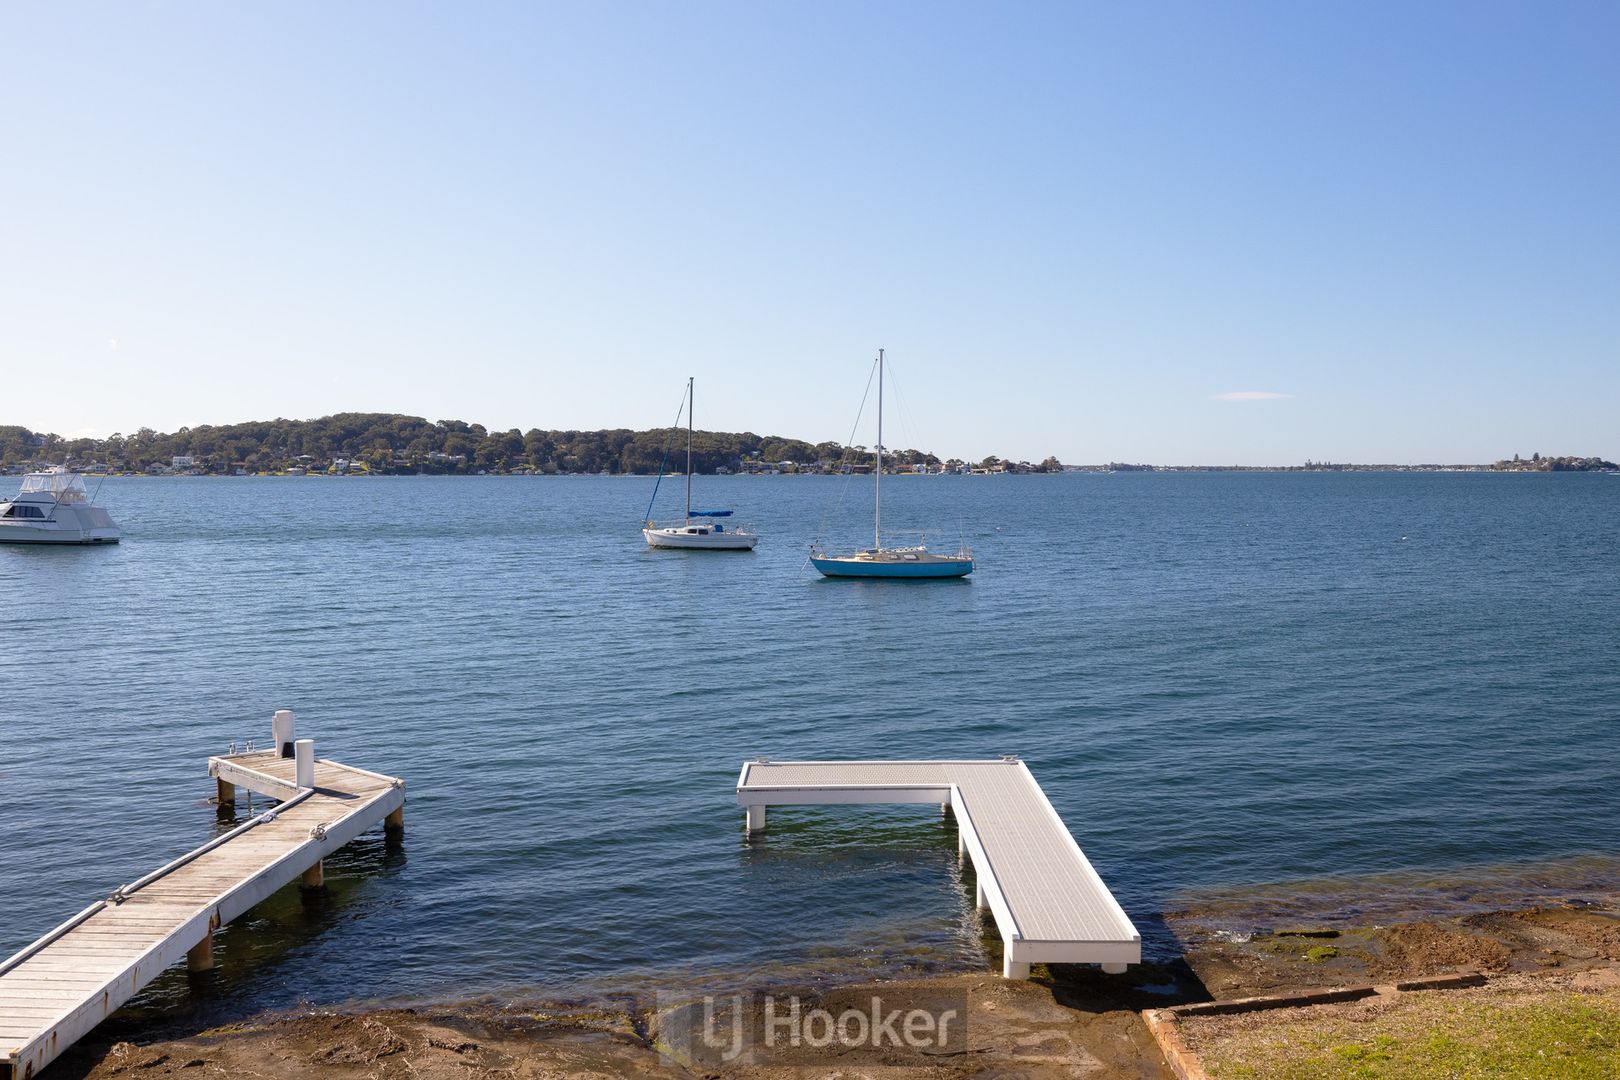 Sold 197 Fishing Point Road, Fishing Point NSW 2283 on 09 Sep 2021